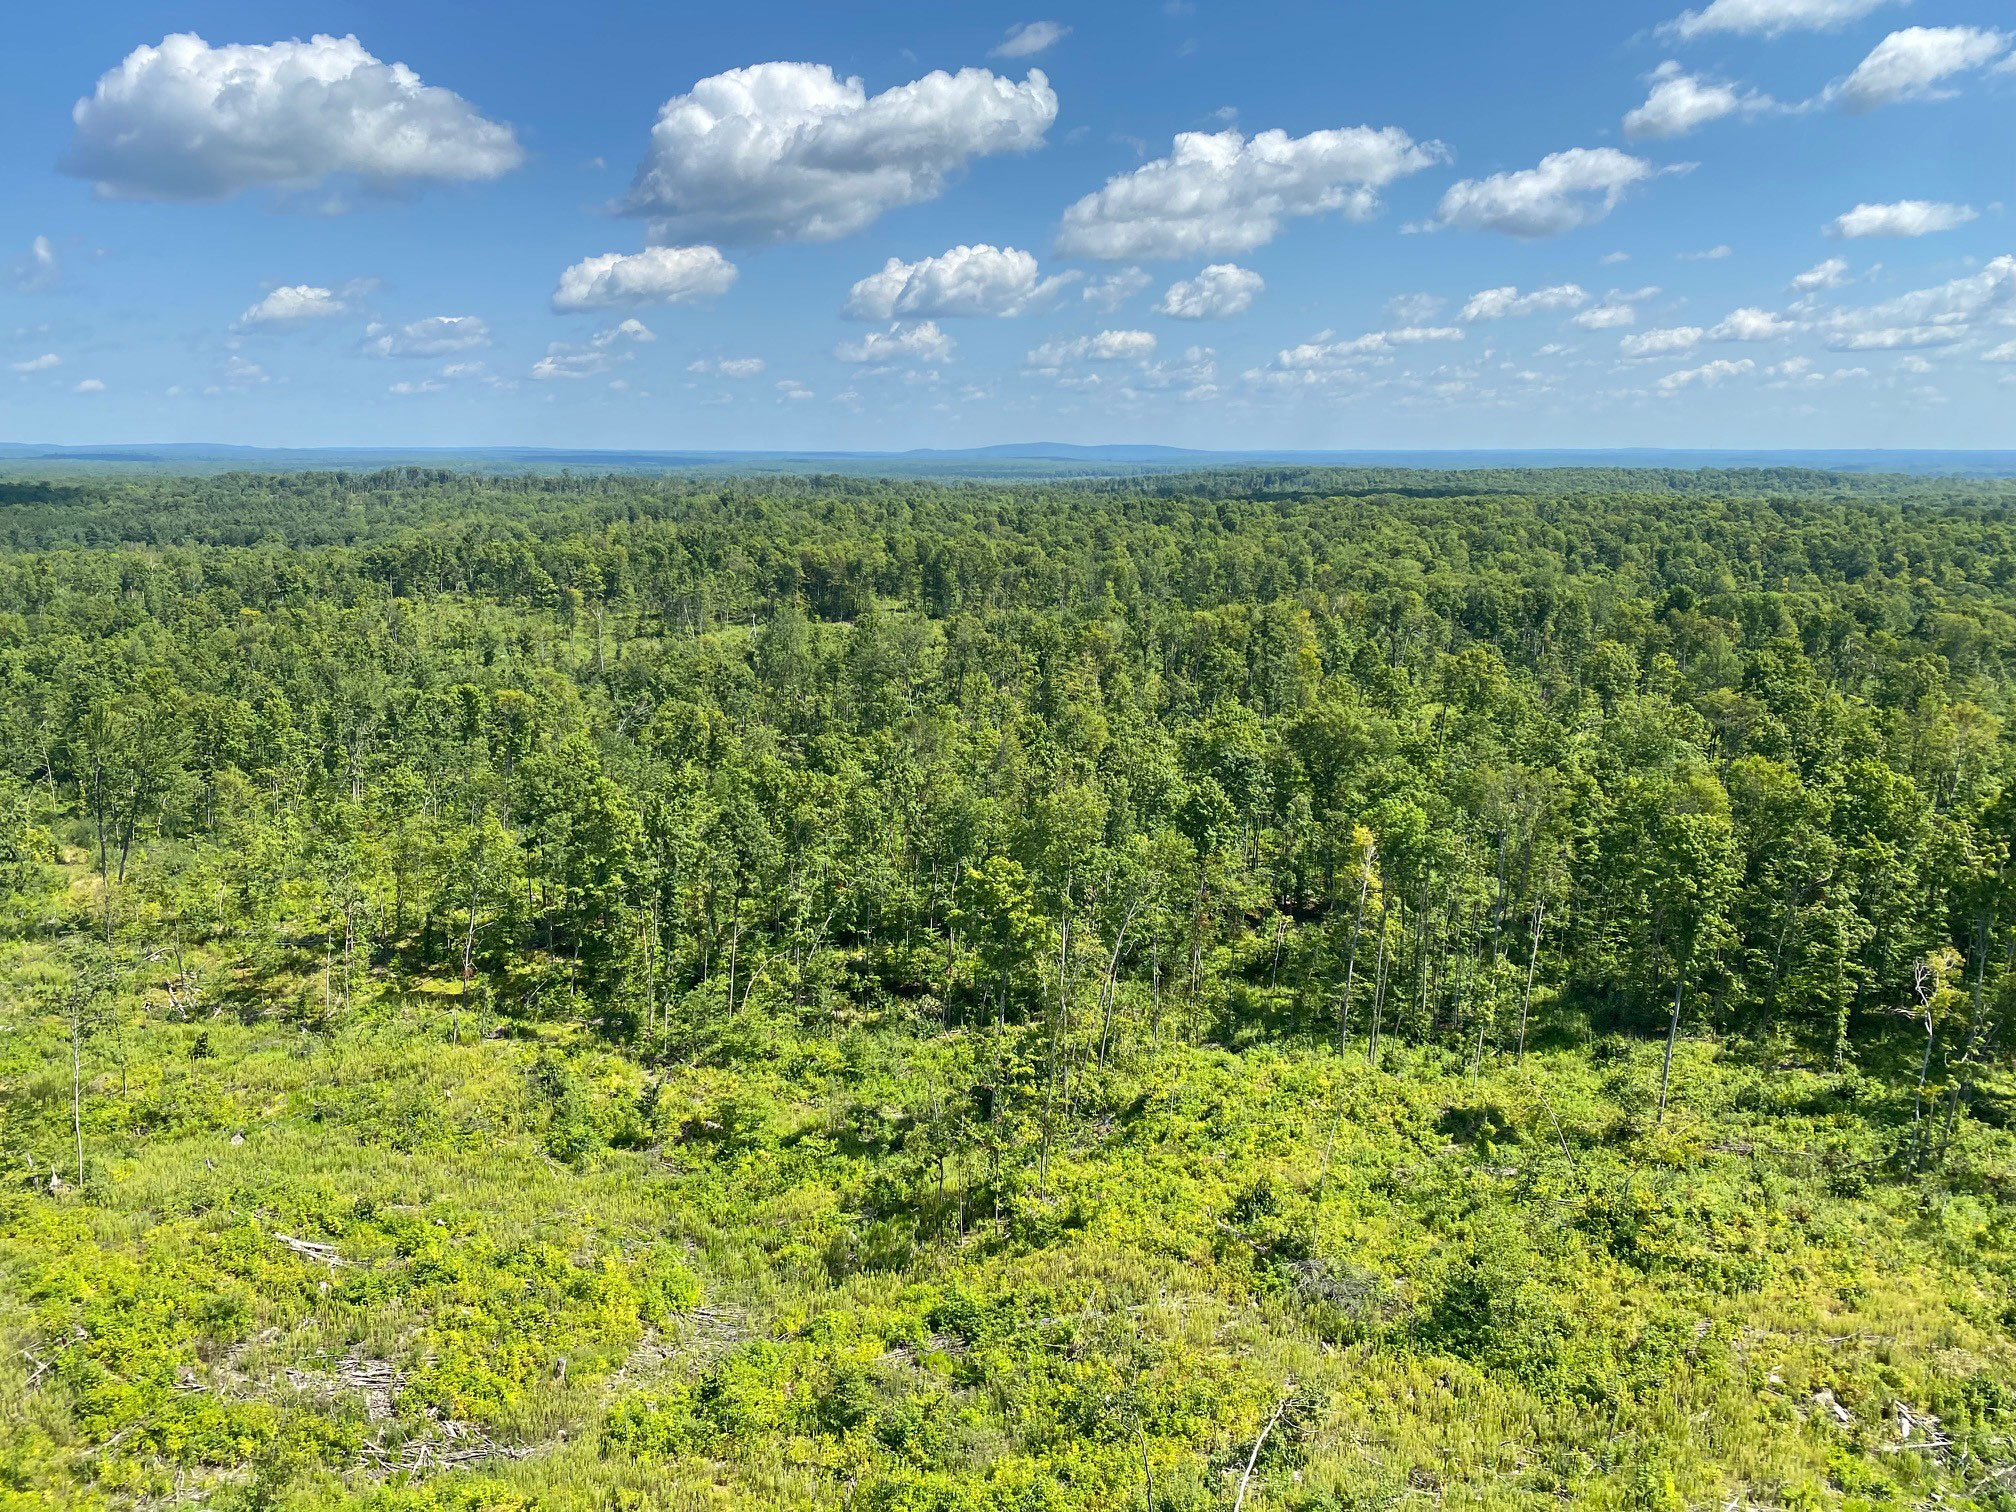 View from Mountain Fire Lookout Tower in Wisconsin